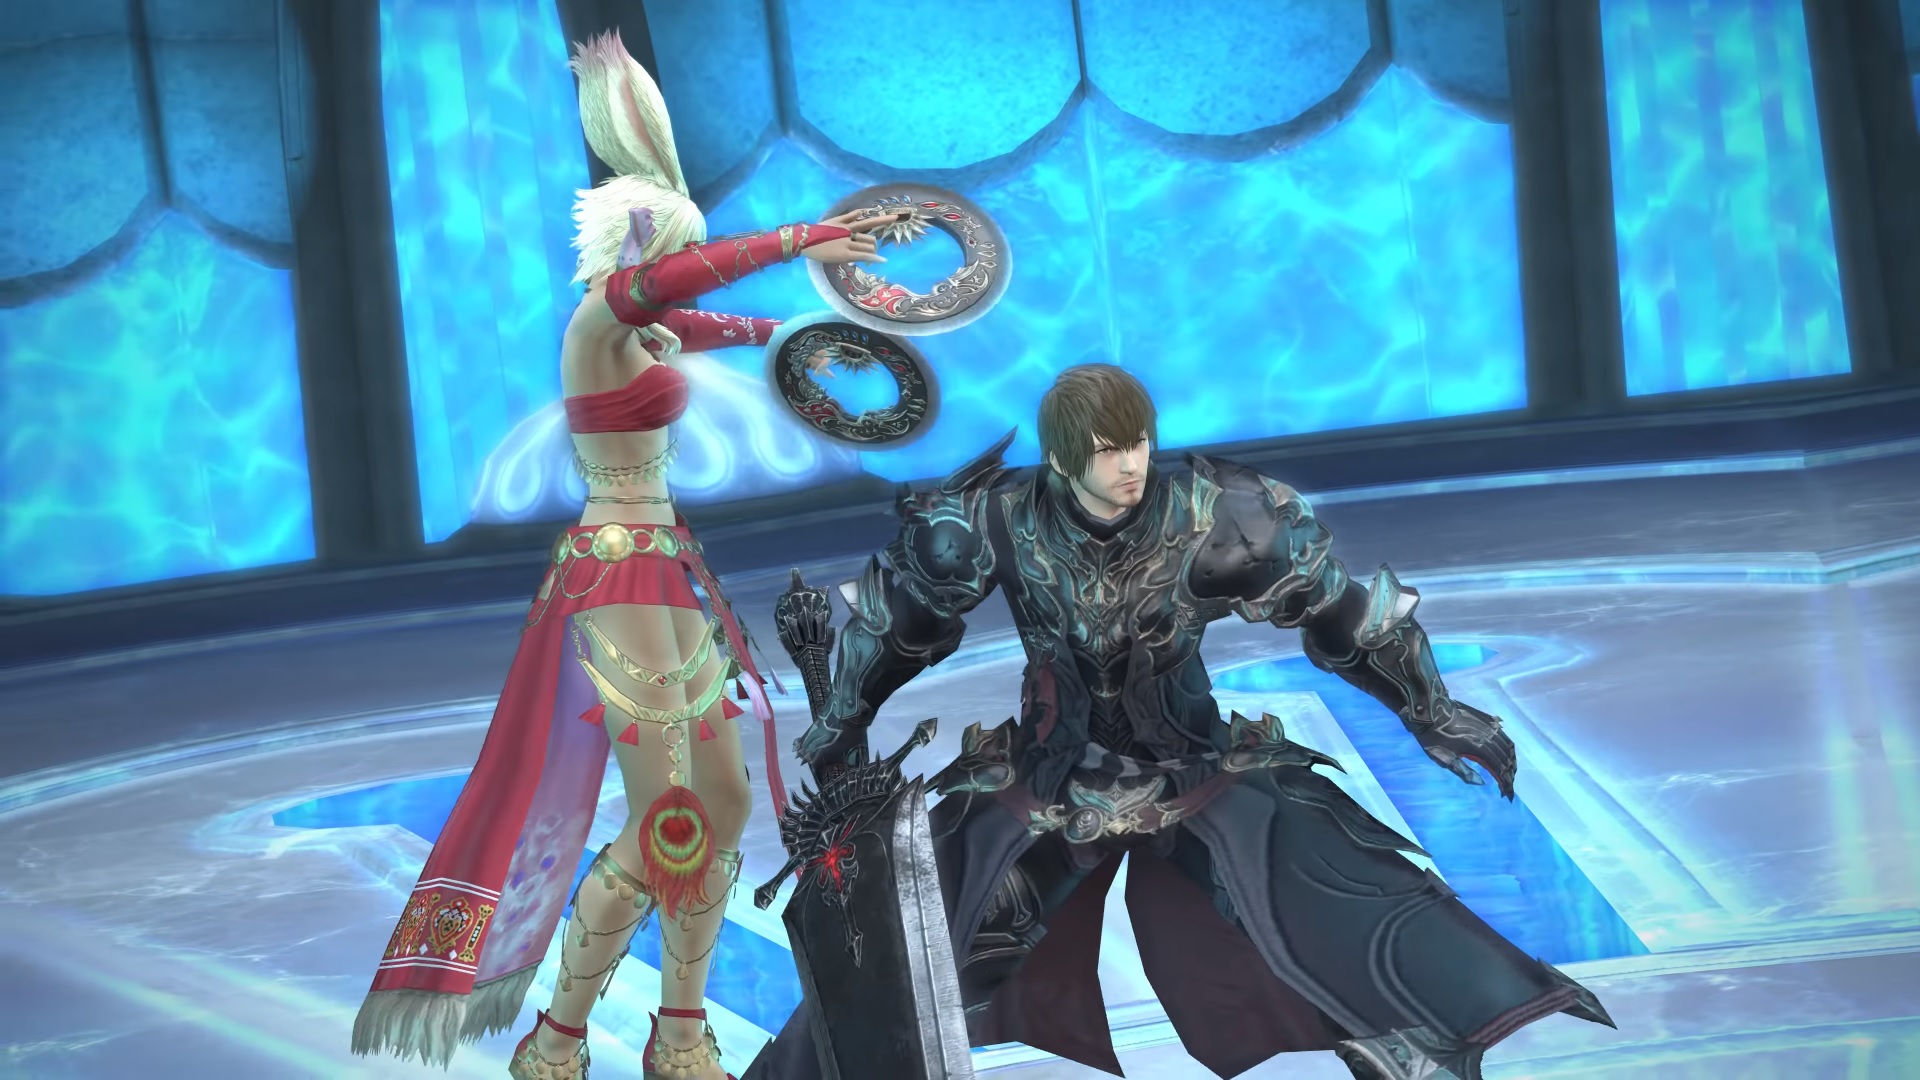 Ff14 Adventure Jump Start Sale Will Get You Ready For Shadowbringers